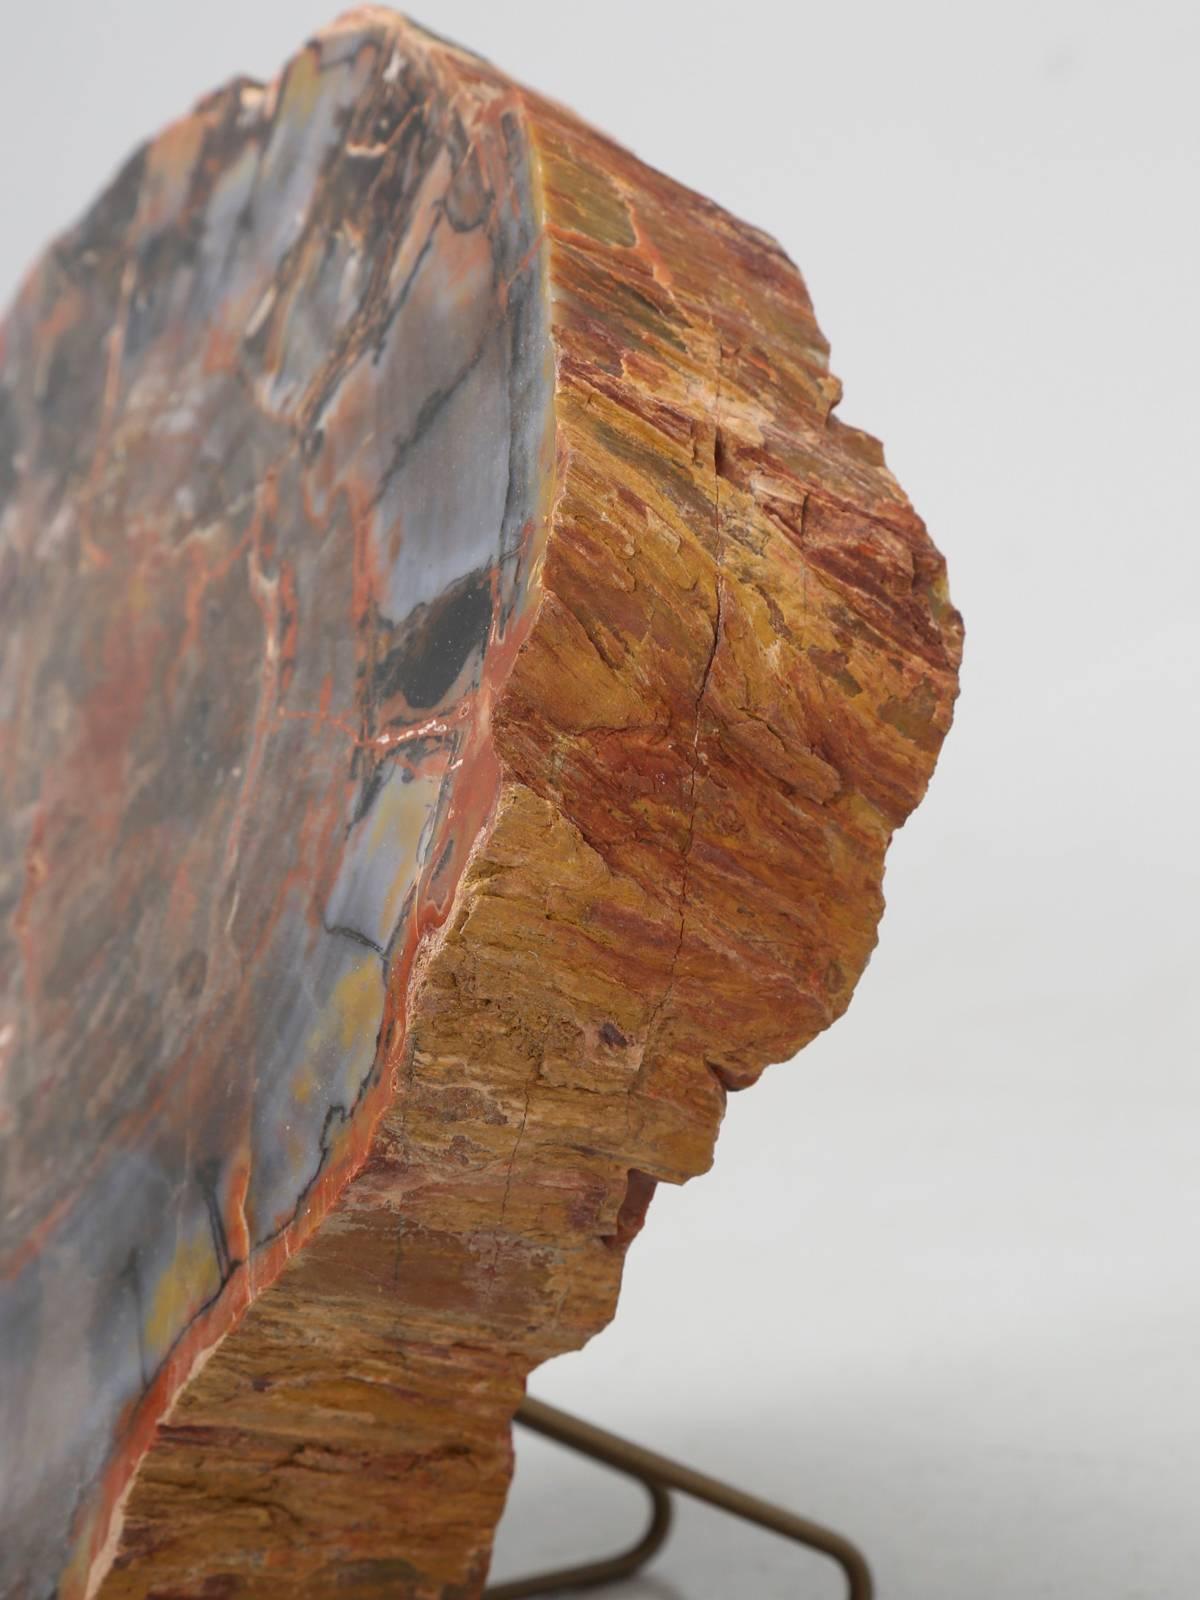 18th Century and Earlier Petrified Wood from Petrified Forest in Arizona